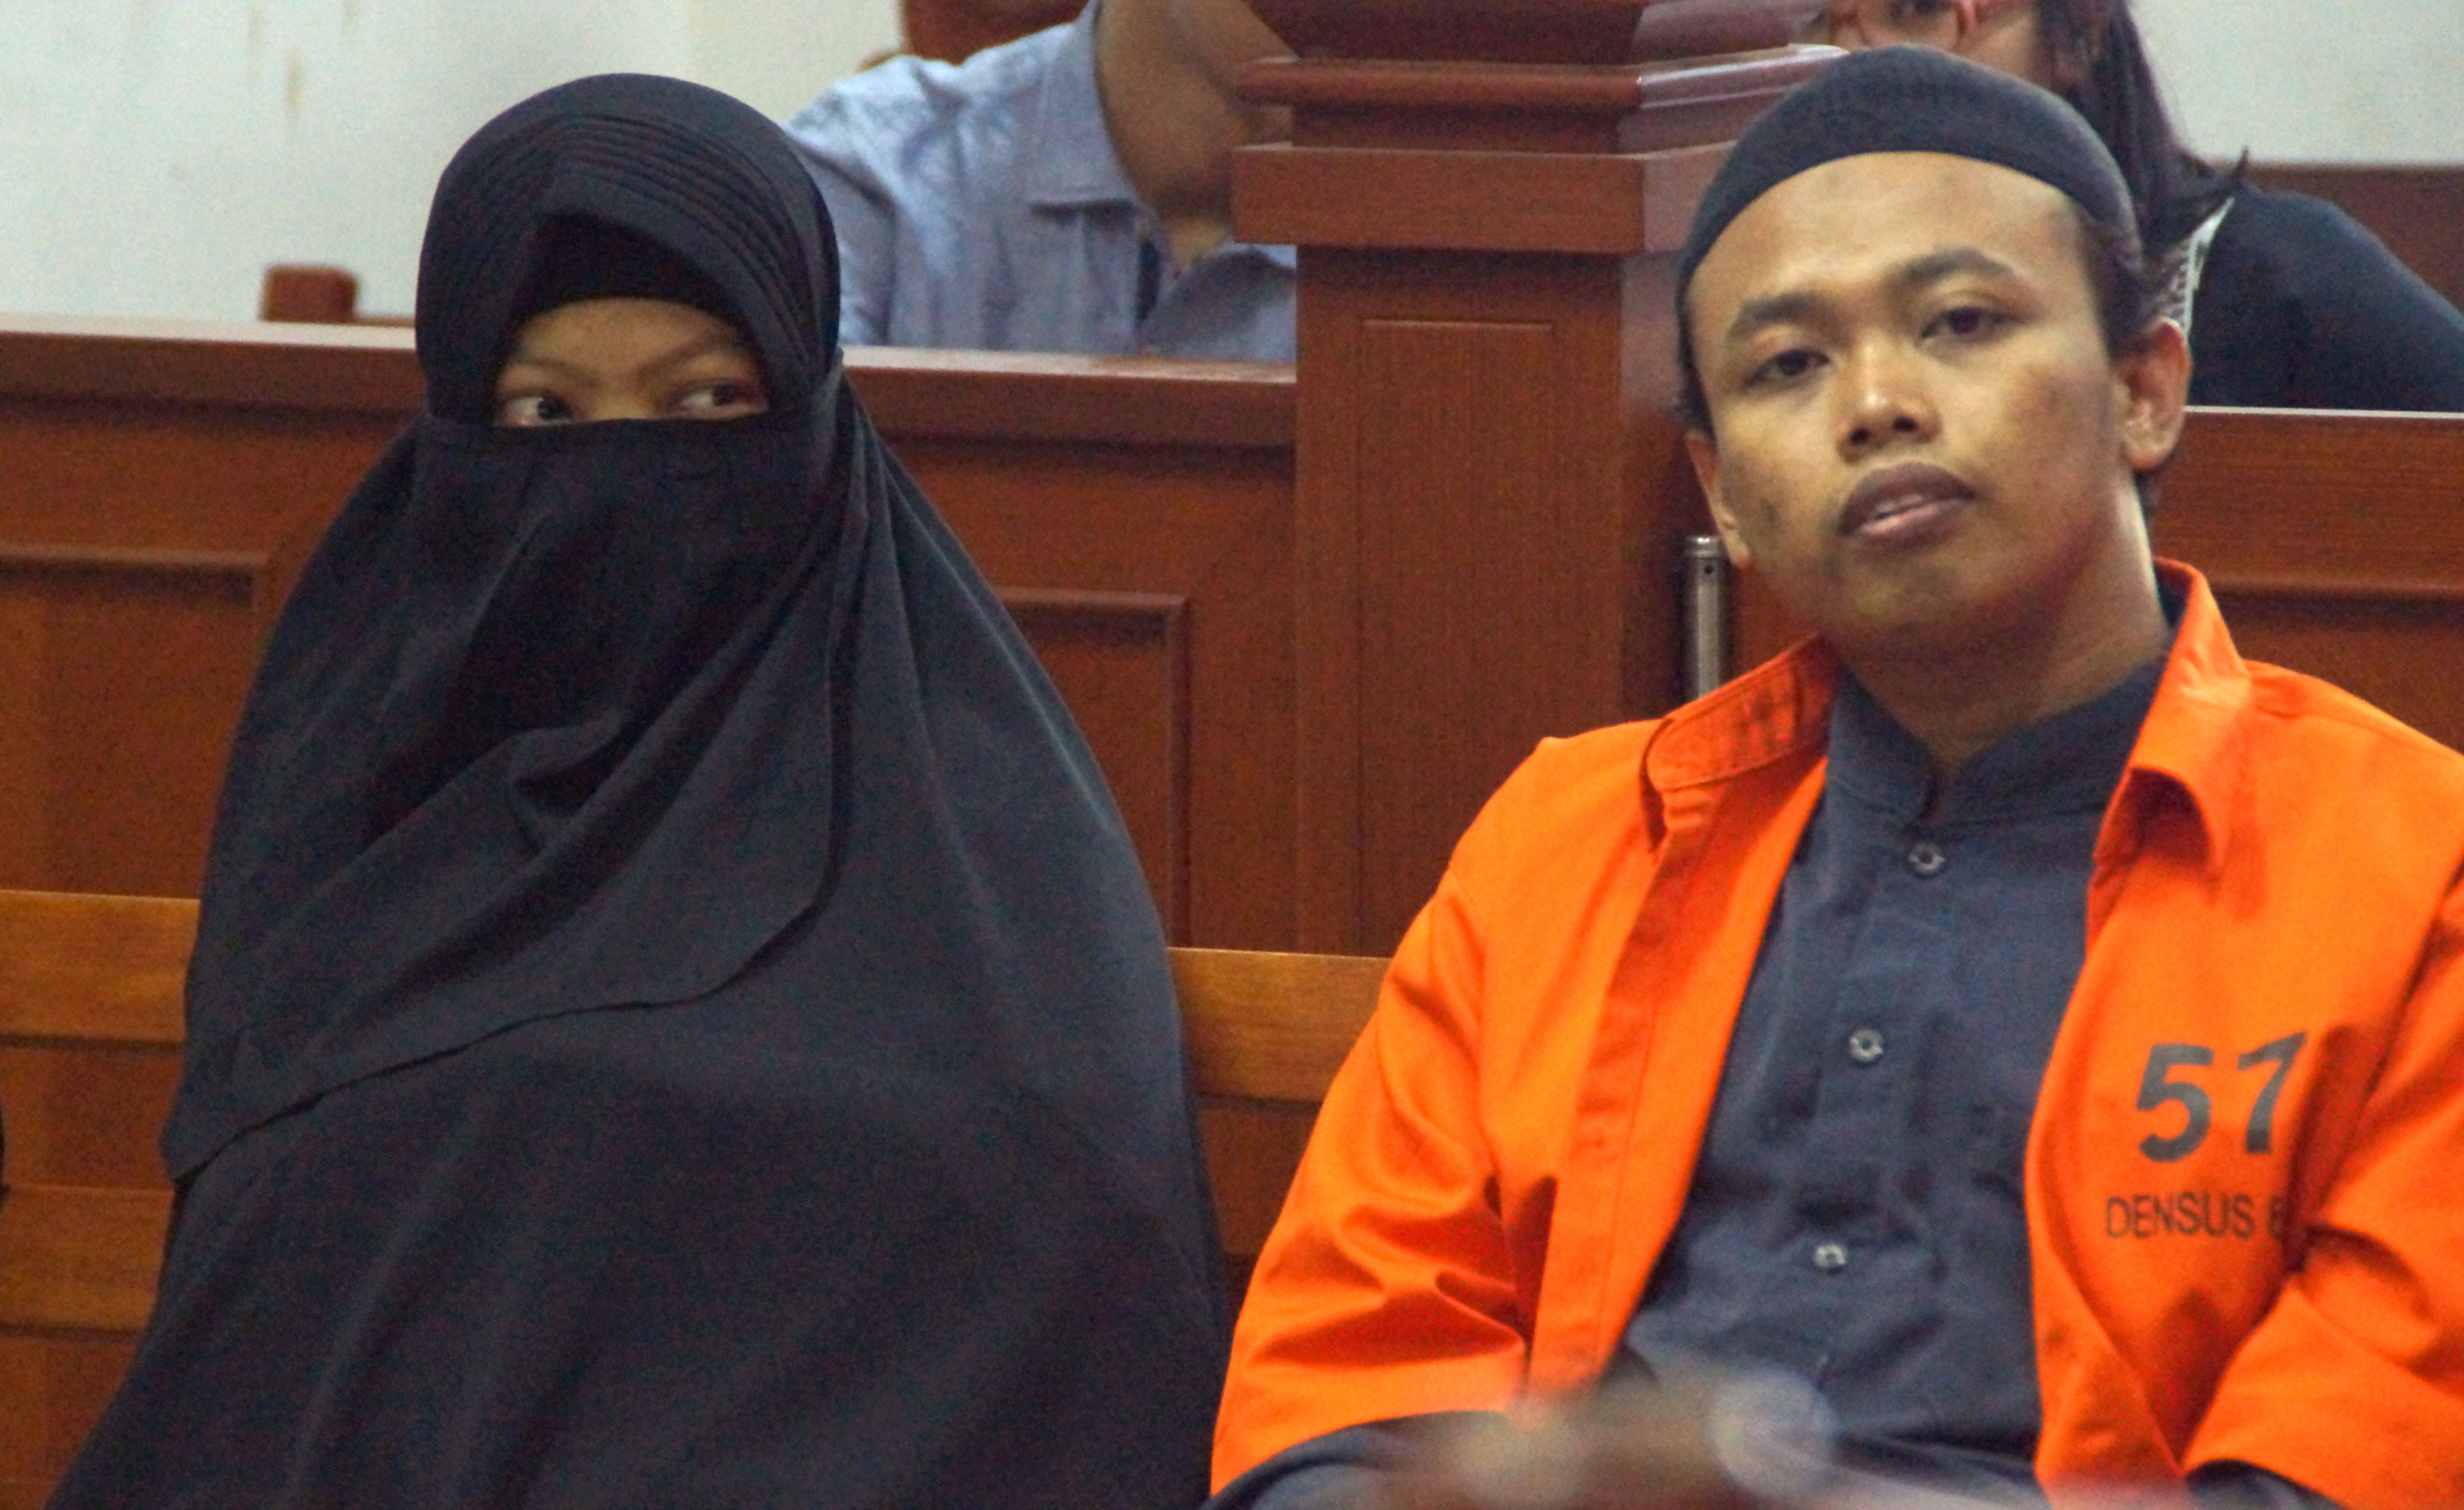 This Aug. 23, 2017 shows Dian Yulia Novi (L) with her husband Nur Solikin during their trial at East Jakarta District Court in Jakarta. (Arie Firdaus—AFP/Getty Images)